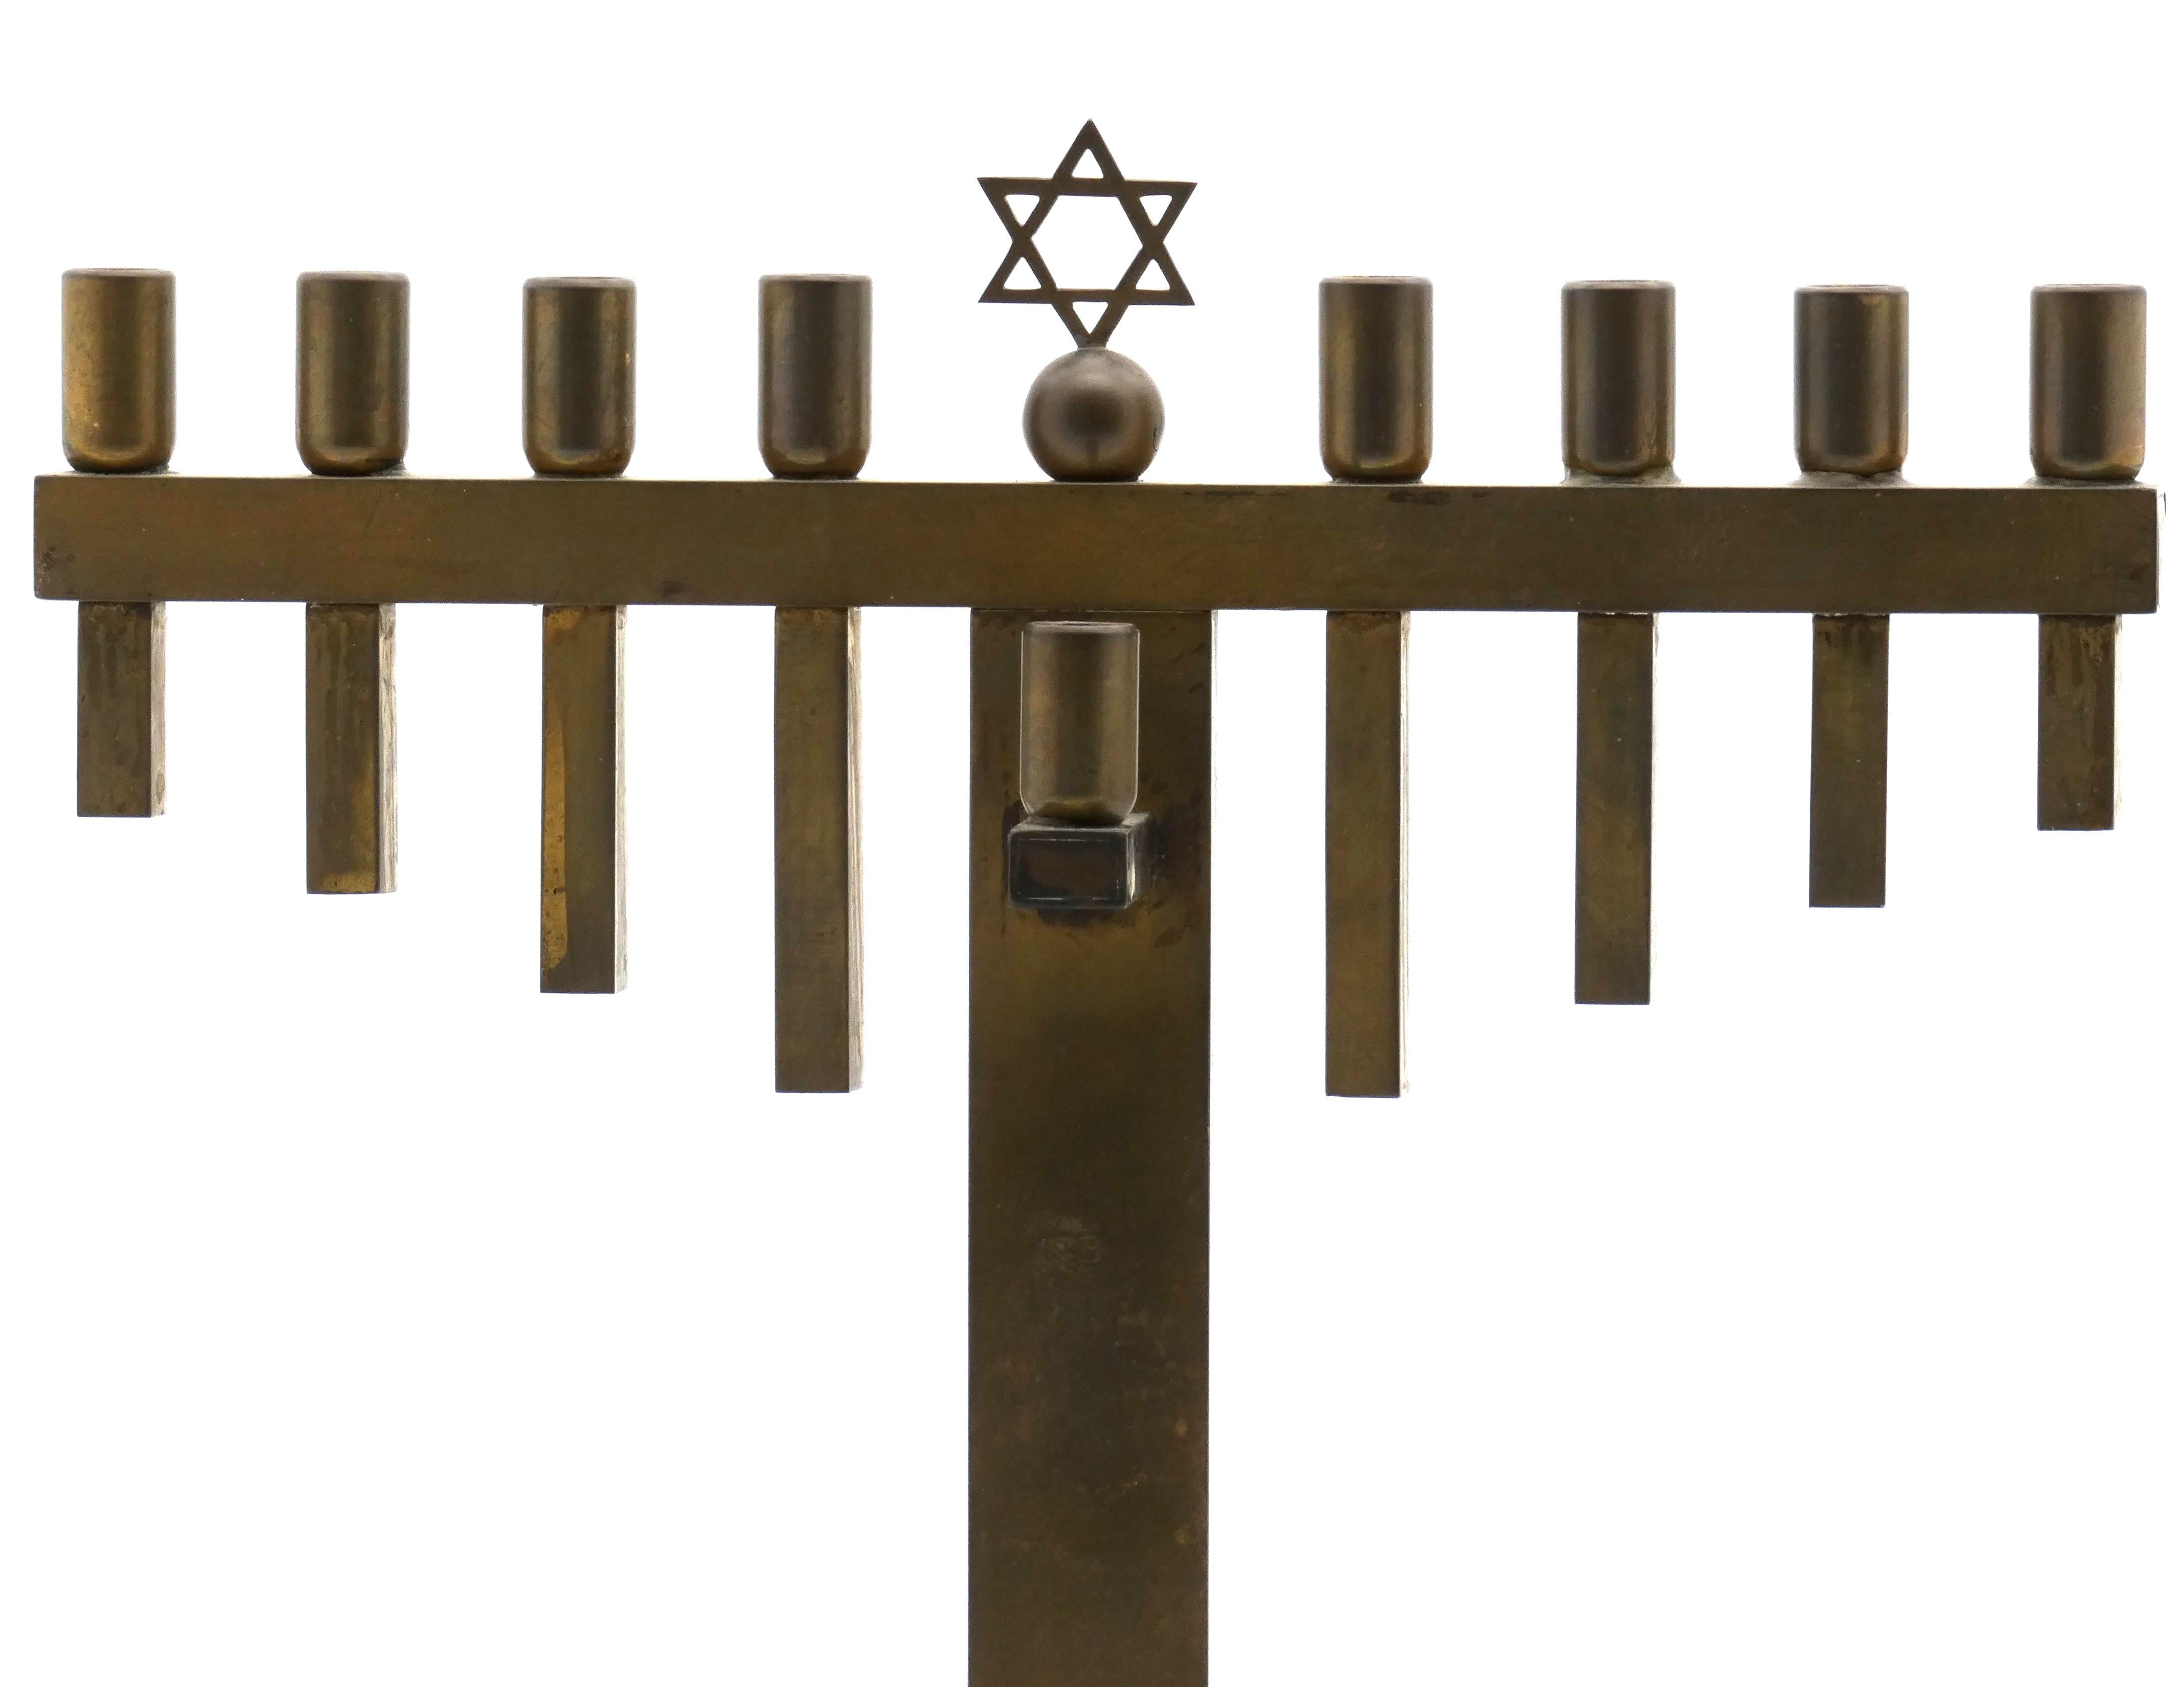 The German brass menorah displayed is an exemplary sample of the Art Deco age, with its cylindrical and defined structural shapes and craftsmanship.

Menorah stands on a flat base with arched split pipes formed from its base on either side. 

Three